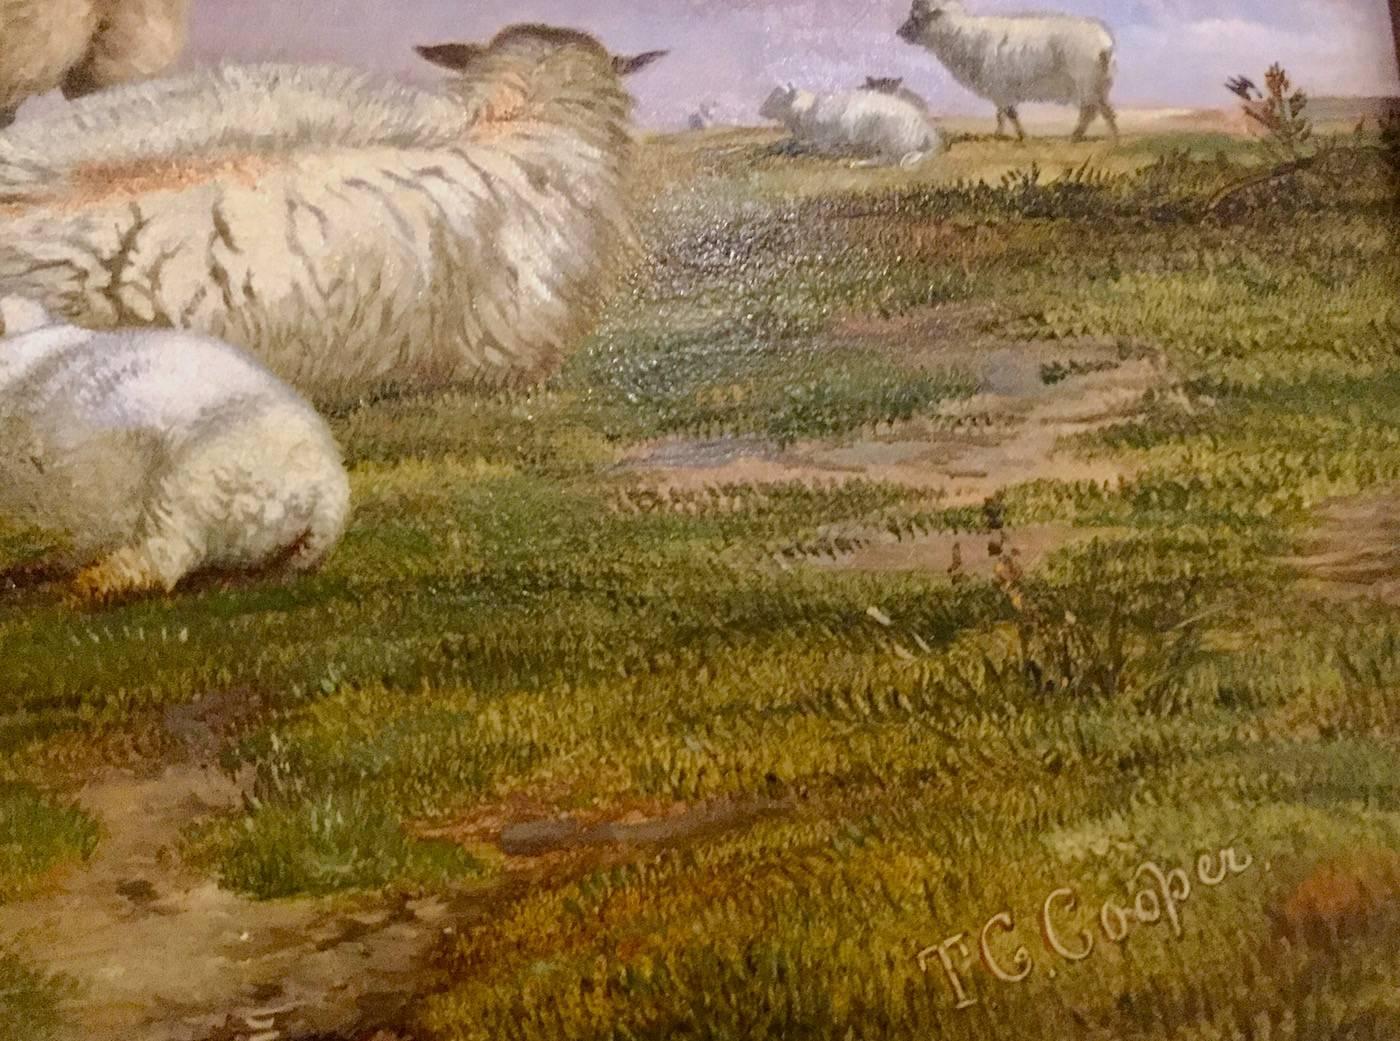 Sheep in a Landscape An English Scene Victorian 19th Century by T G Cooper  - Naturalistic Painting by Thomas George Cooper